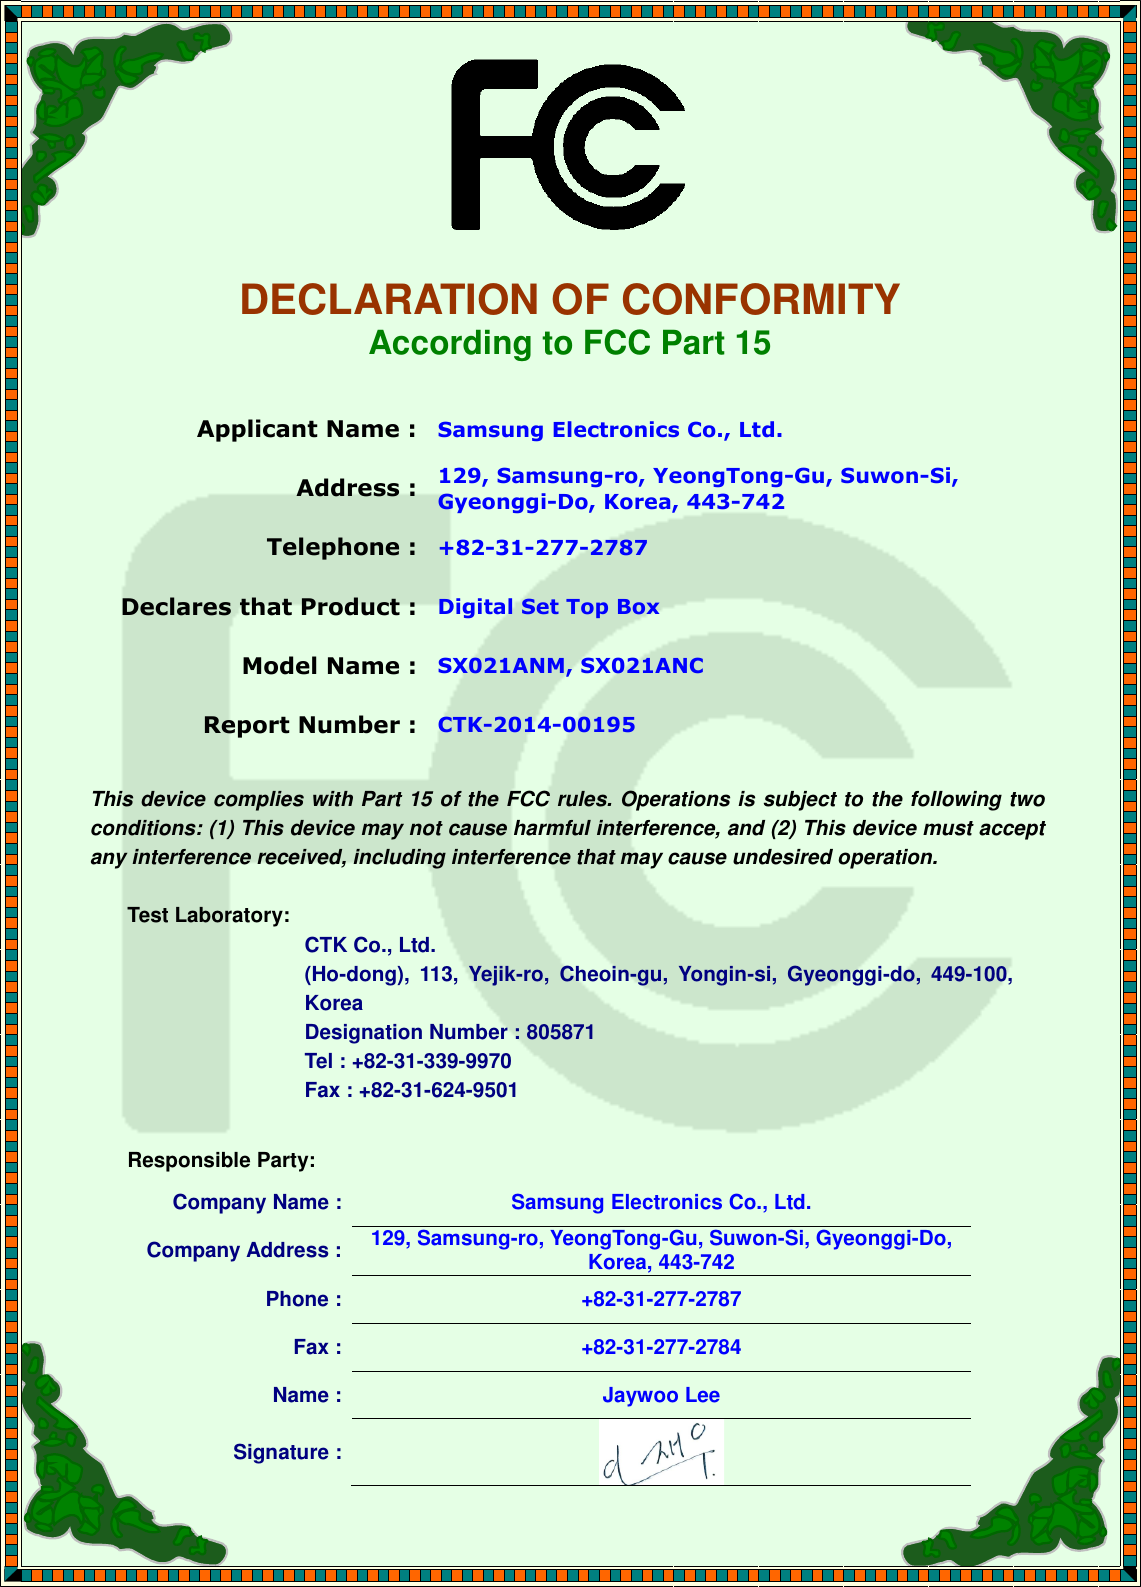     DECLARATION OF CONFORMITY According to FCC Part 15  Applicant Name : Samsung Electronics Co., Ltd. Address : 129, Samsung-ro, YeongTong-Gu, Suwon-Si, Gyeonggi-Do, Korea, 443-742 Telephone : +82-31-277-2787 Declares that Product : Digital Set Top Box Model Name : SX021ANM, SX021ANC Report Number : CTK-2014-00195  This device complies with Part 15 of the FCC rules. Operations is subject to the following two conditions: (1) This device may not cause harmful interference, and (2) This device must accept any interference received, including interference that may cause undesired operation.  Test Laboratory:   CTK Co., Ltd. (Ho-dong),  113,  Yejik-ro,  Cheoin-gu,  Yongin-si,  Gyeonggi-do,  449-100, Korea     Designation Number : 805871     Tel : +82-31-339-9970     Fax : +82-31-624-9501  Responsible Party: Company Name : Samsung Electronics Co., Ltd. Company Address : 129, Samsung-ro, YeongTong-Gu, Suwon-Si, Gyeonggi-Do, Korea, 443-742 Phone : +82-31-277-2787 Fax : +82-31-277-2784 Name : Jaywoo Lee Signature :   